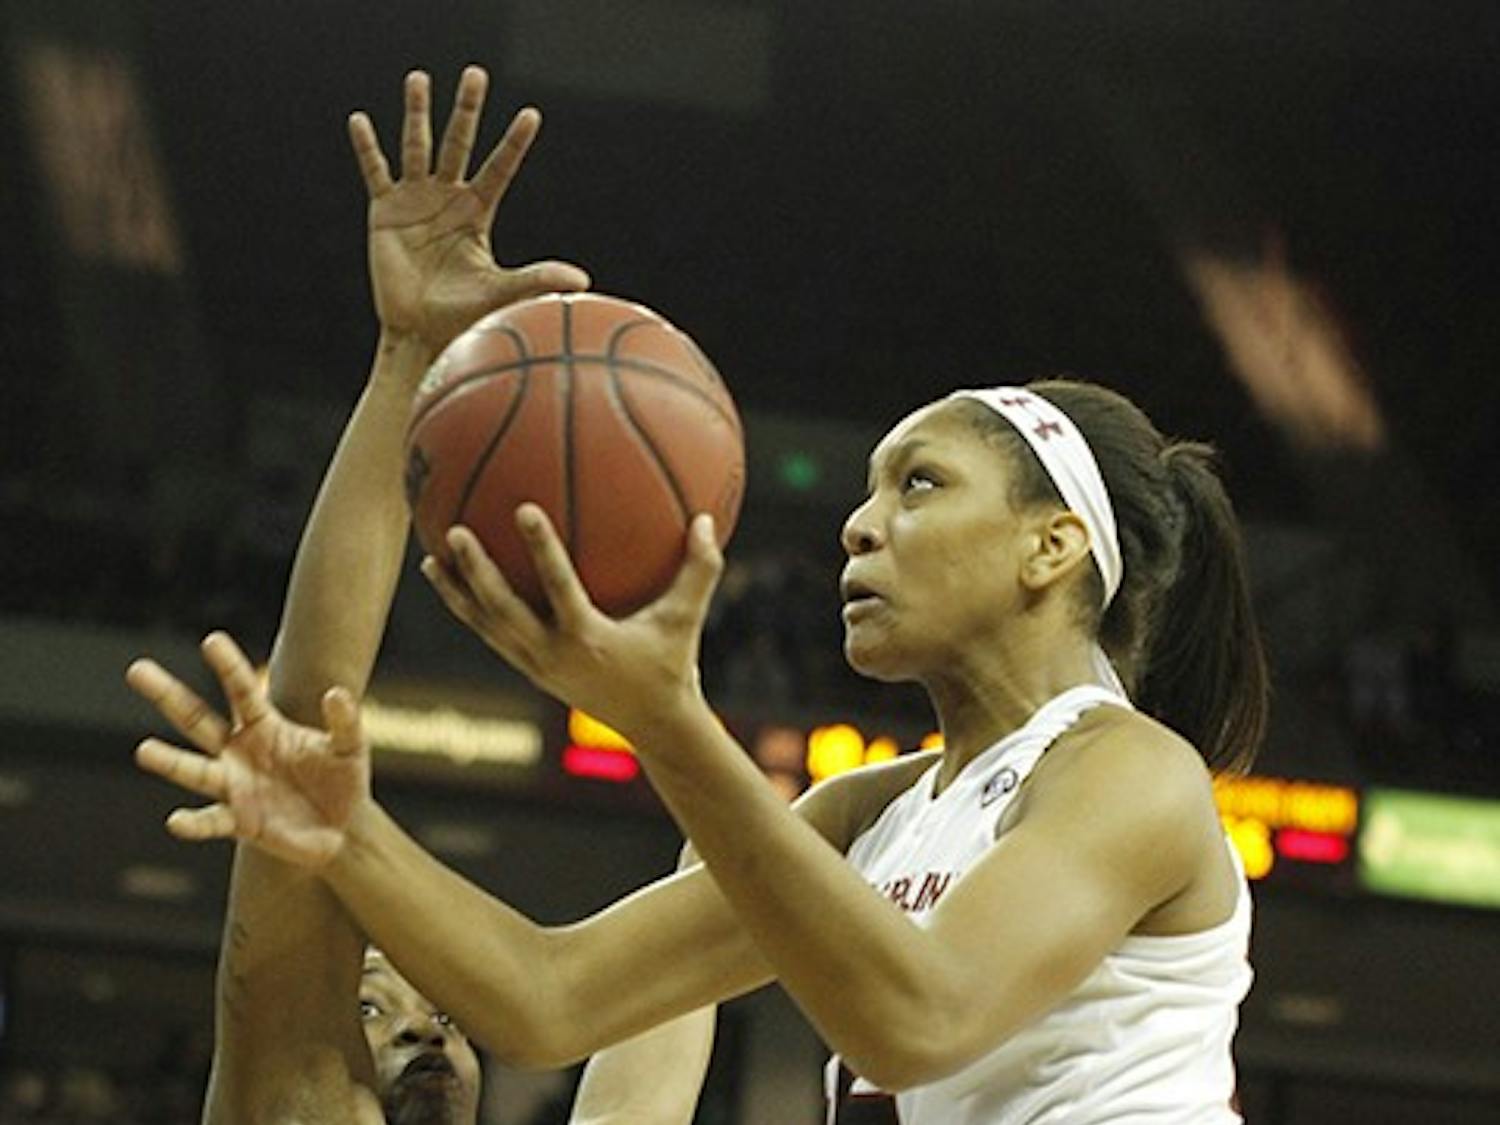 Coming off the bench as a true freshman, South Carolina forward A'ja Wilson is averaging 13.2 points per game, the second highest tally by a Gamecock this season. 